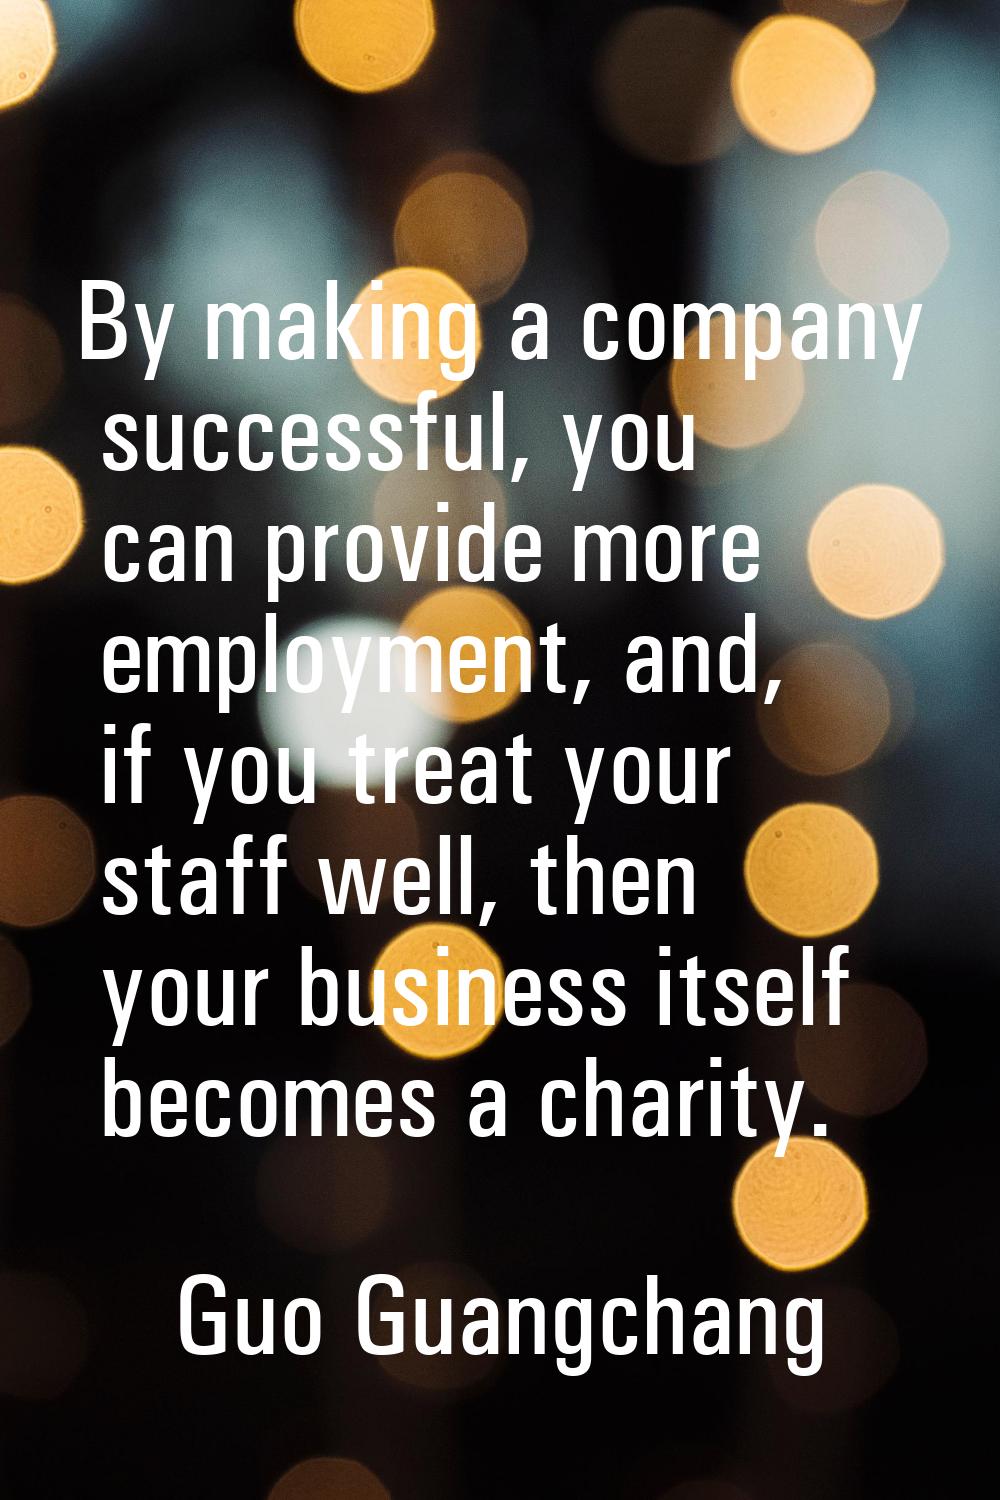 By making a company successful, you can provide more employment, and, if you treat your staff well,